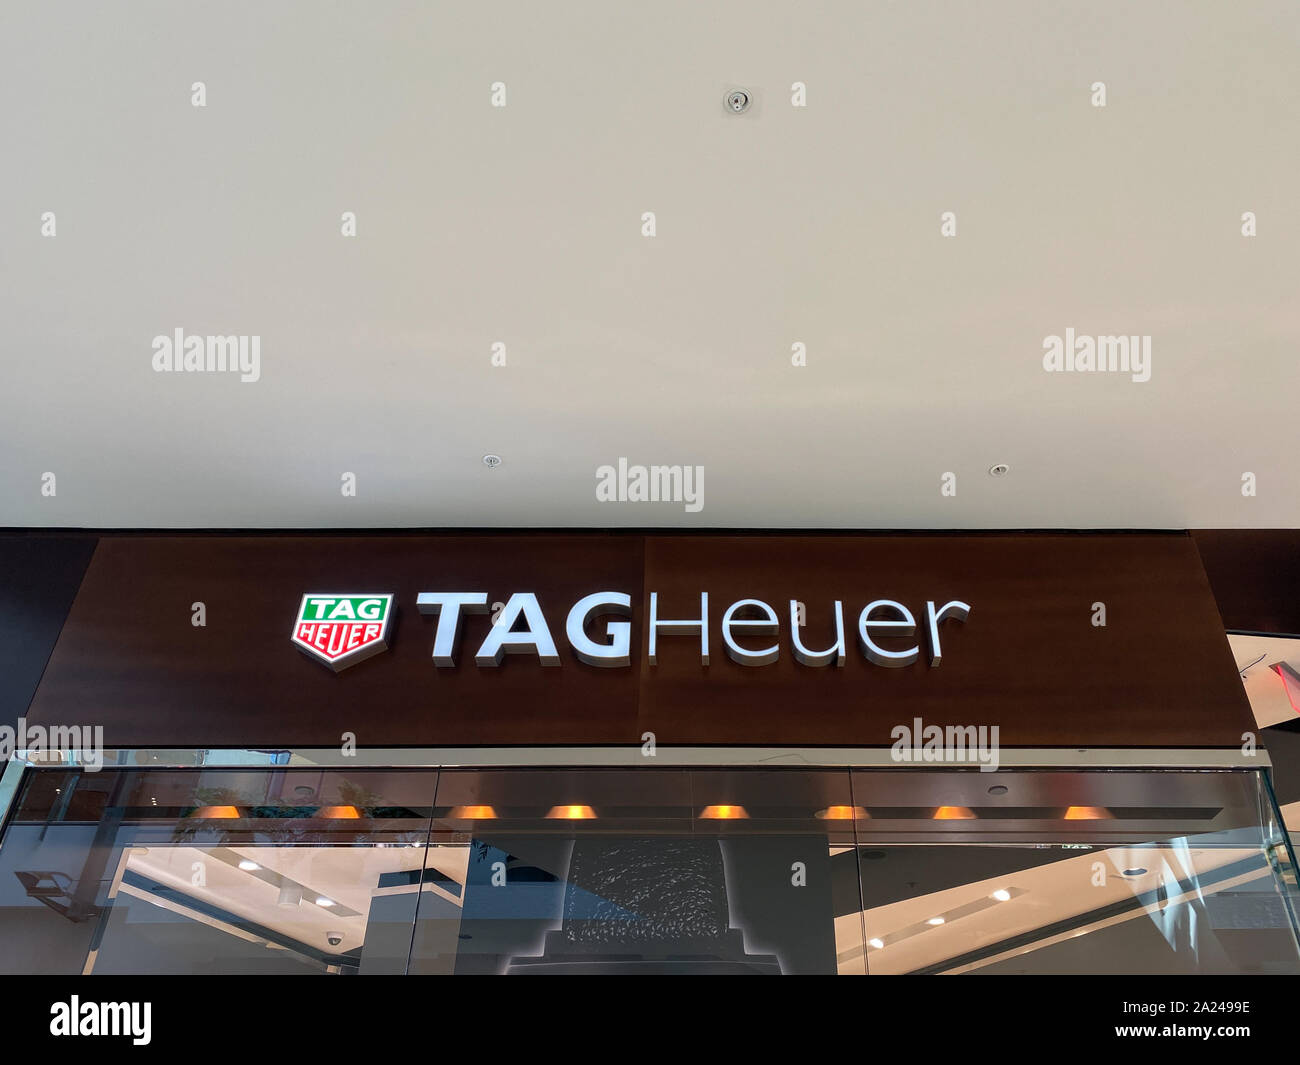 Orlando,FL/USA-9/30/19: A Tag Heuer store in an indoor mall.  Tag Heuer is a Swiss luxury manufacturing company that designs, manufactures and markets Stock Photo